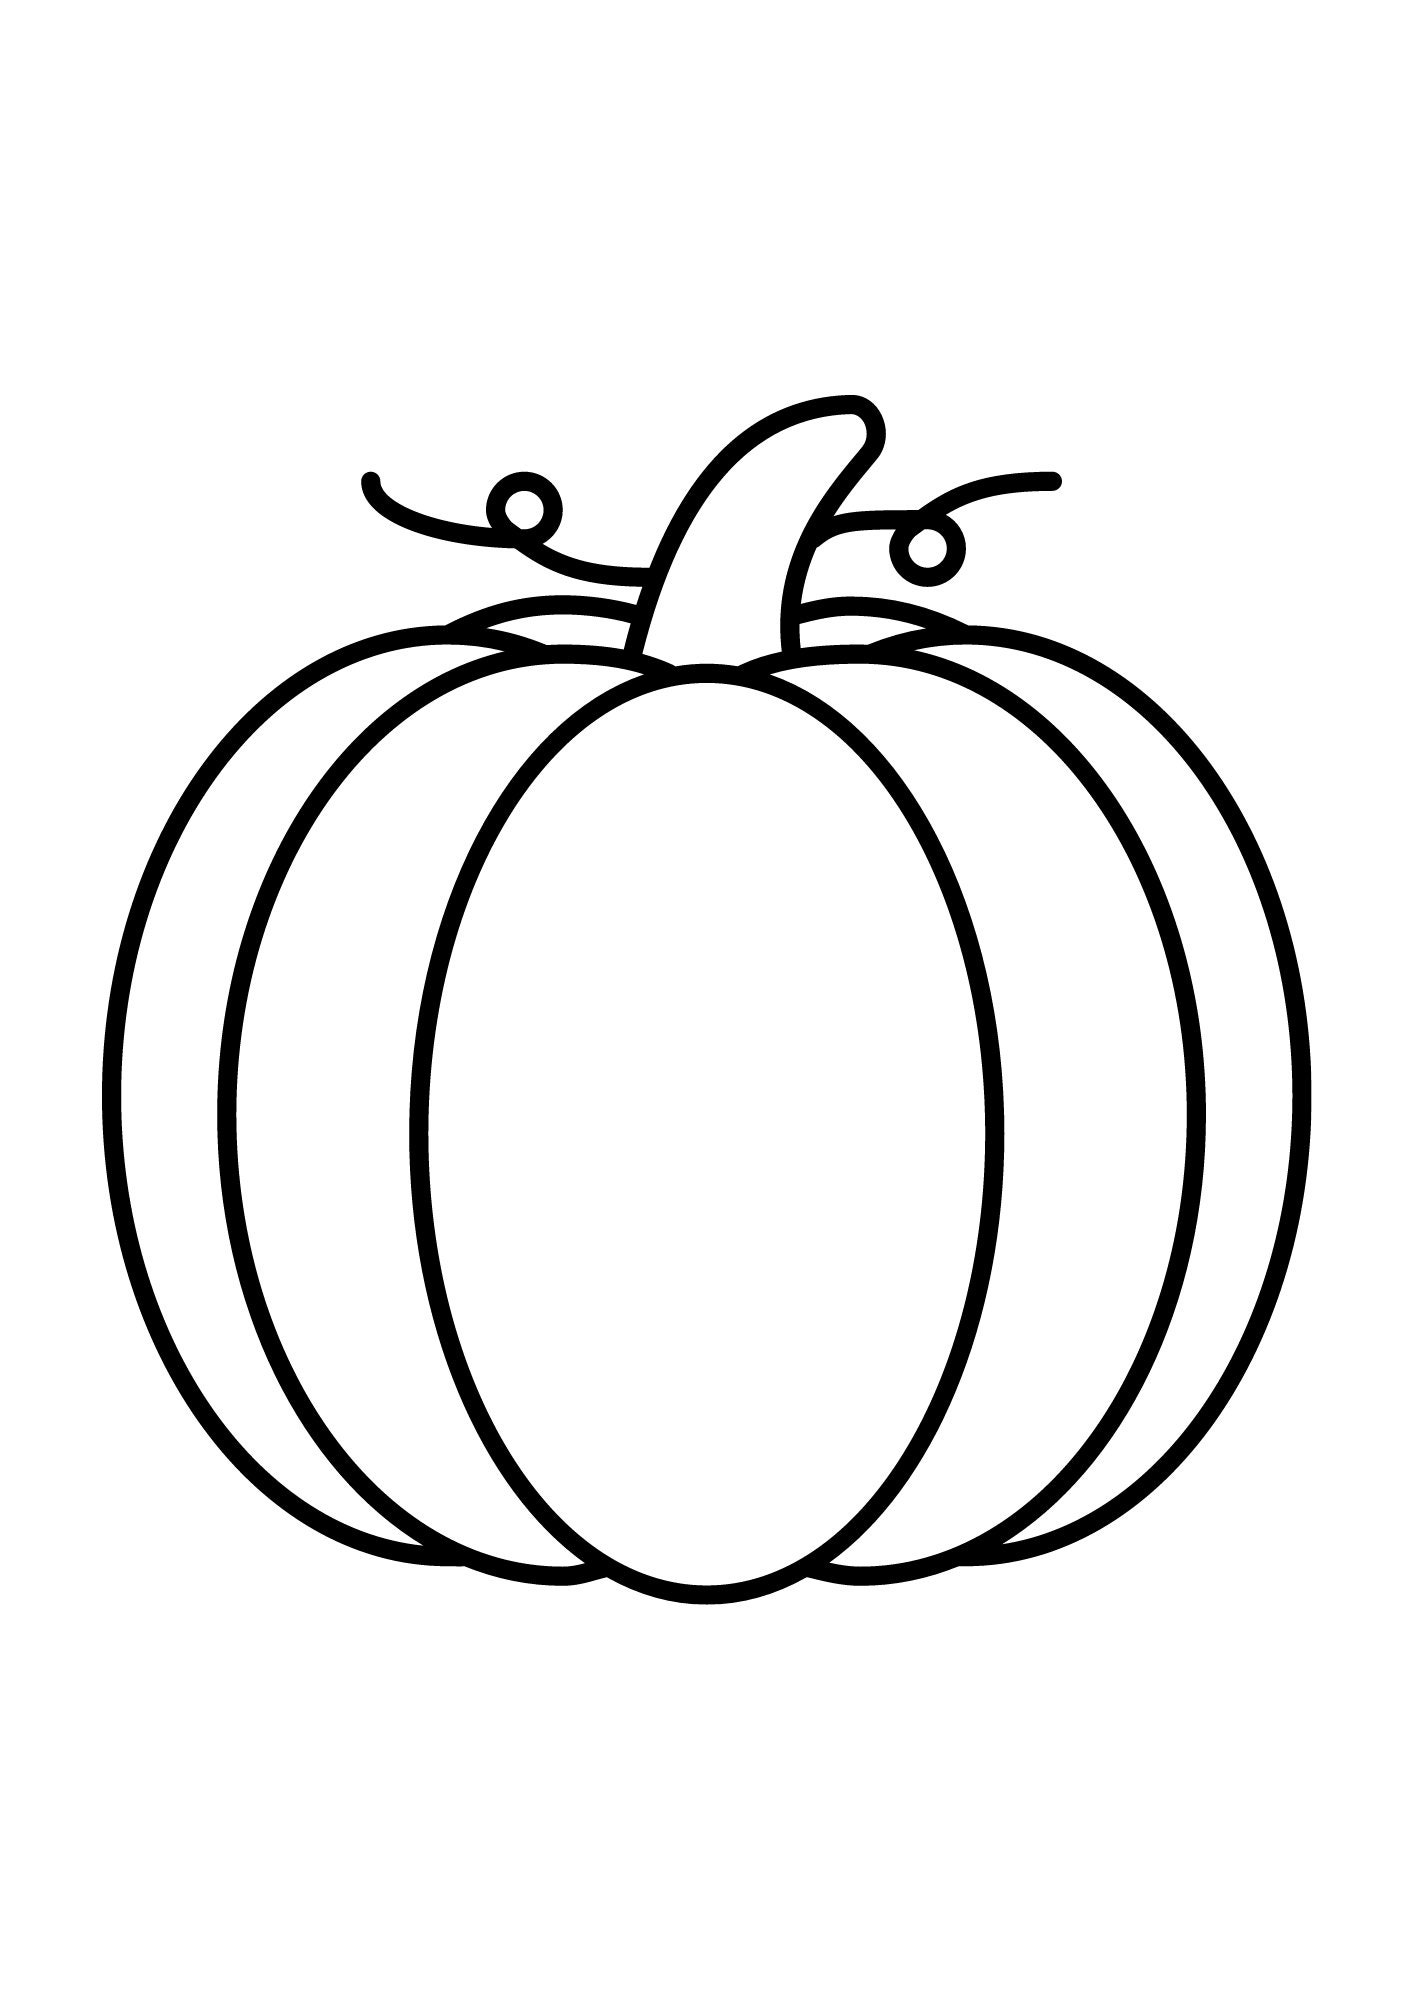 Printable Pumpkin Coloring Pages. Cute Halloween Coloring Pages. Kids Party  or Cute Activities and Teacher Games. -  Canada